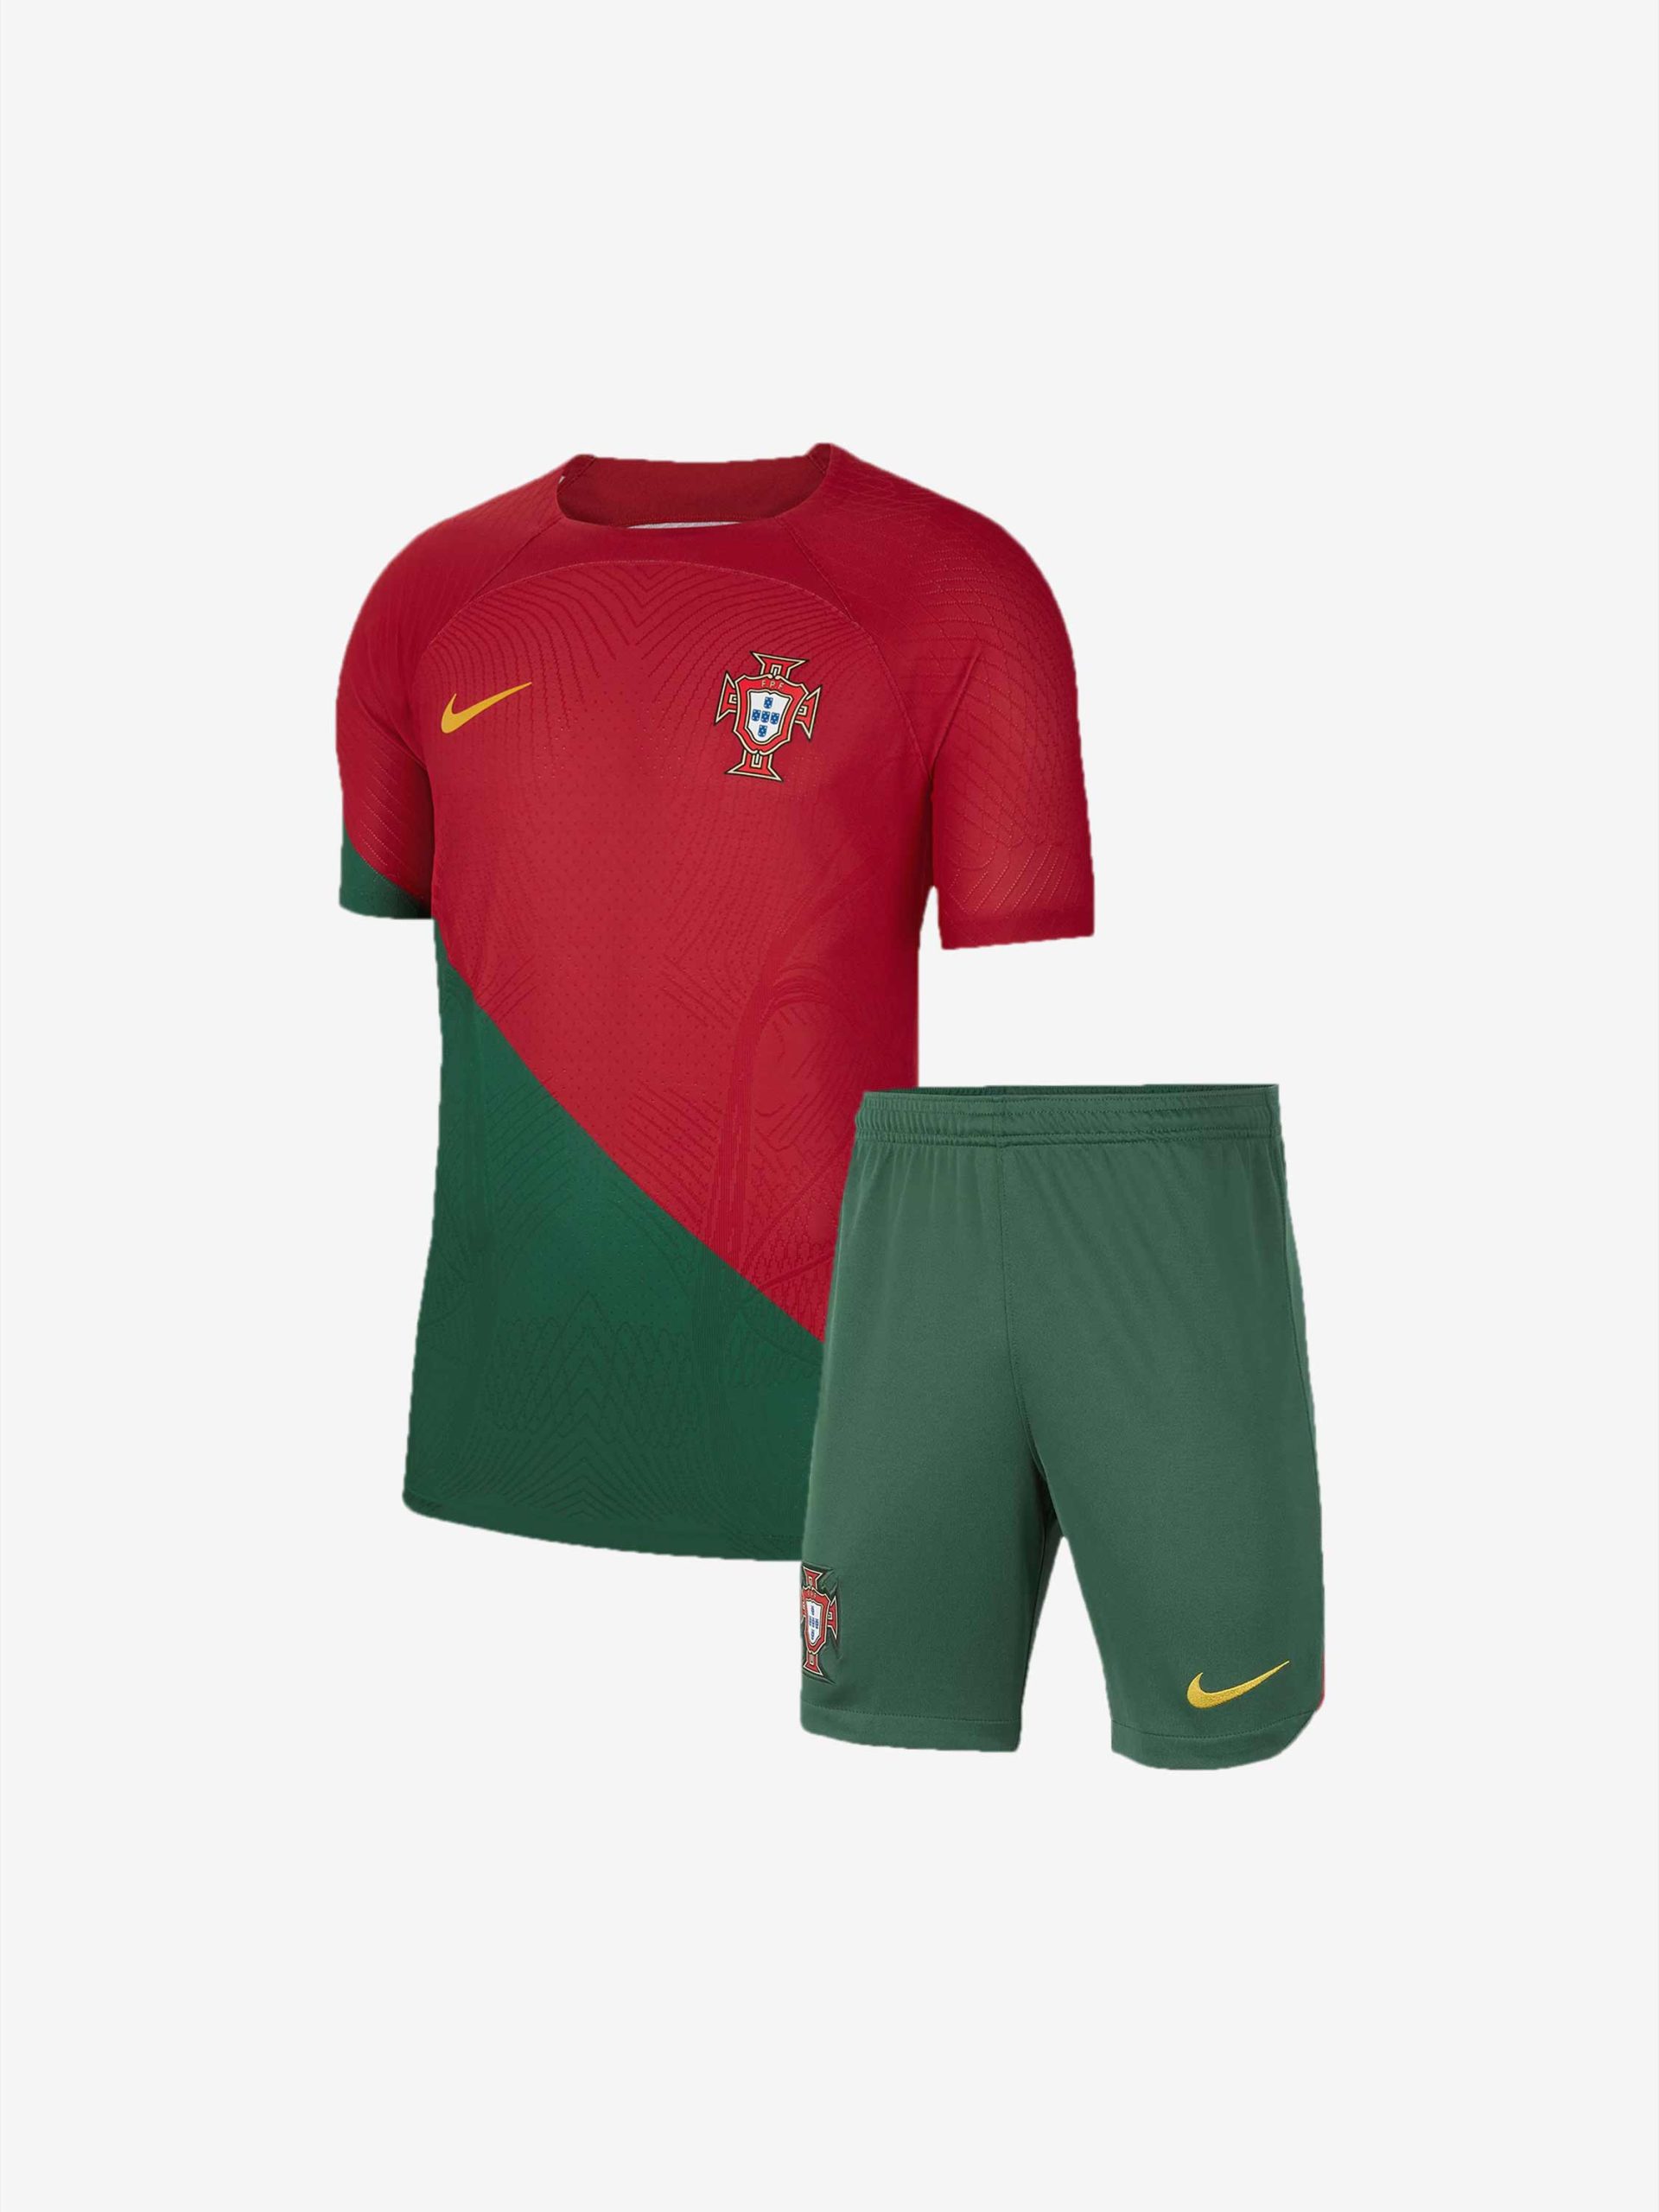 Kids Portugal Home Jersey And Shorts 22-23 Season